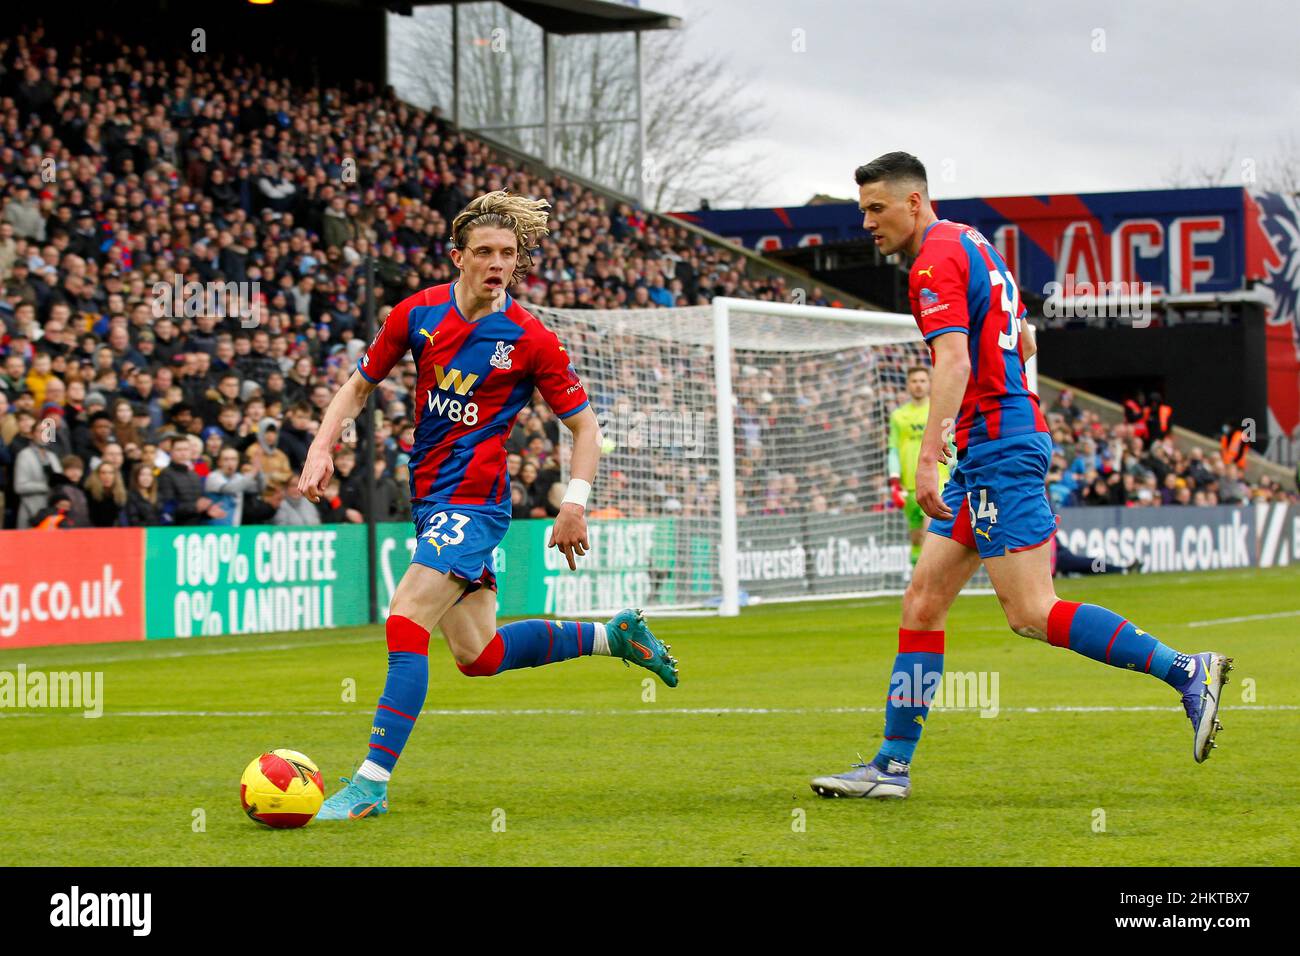 Conor Gallagher #23 of Crystal Palace and Martin Kelly #34 of Crystal Palace Stock Photo